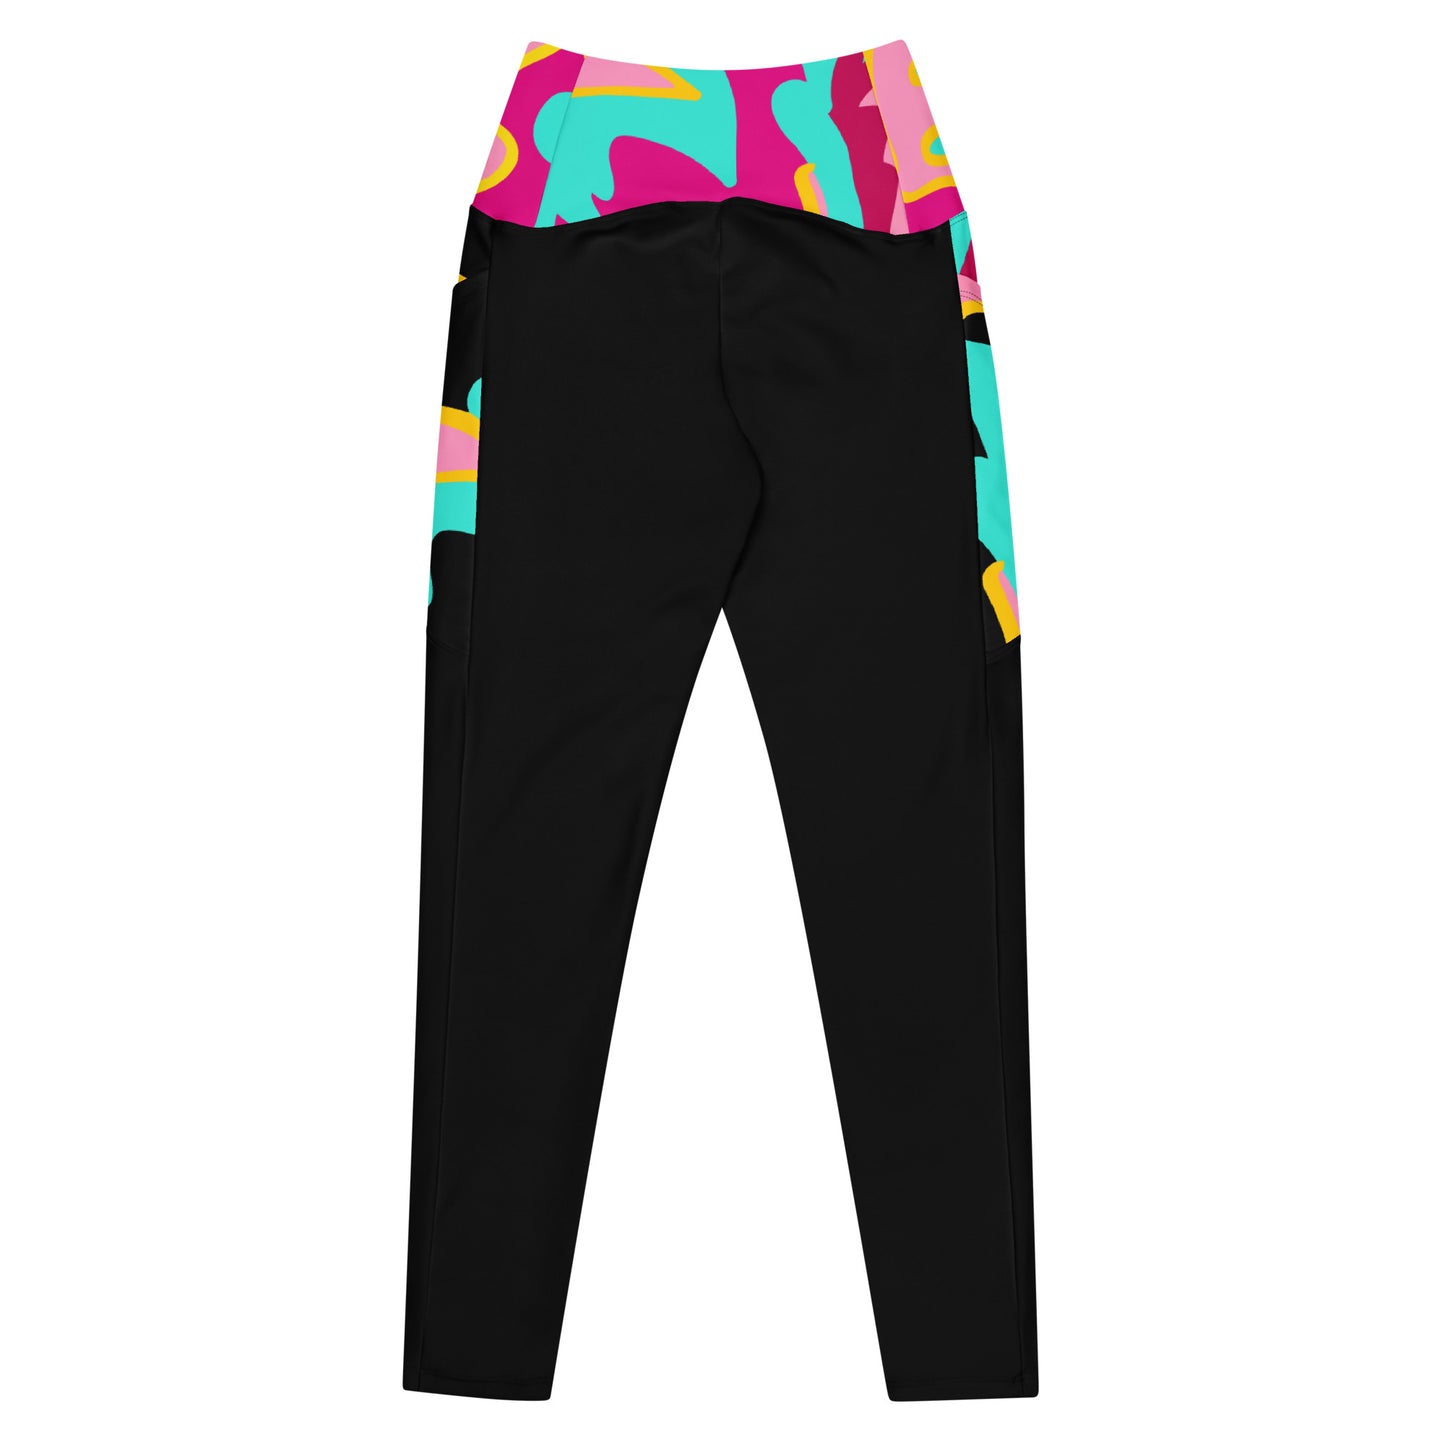 Body Love "New Classic" Leggings with Pockets